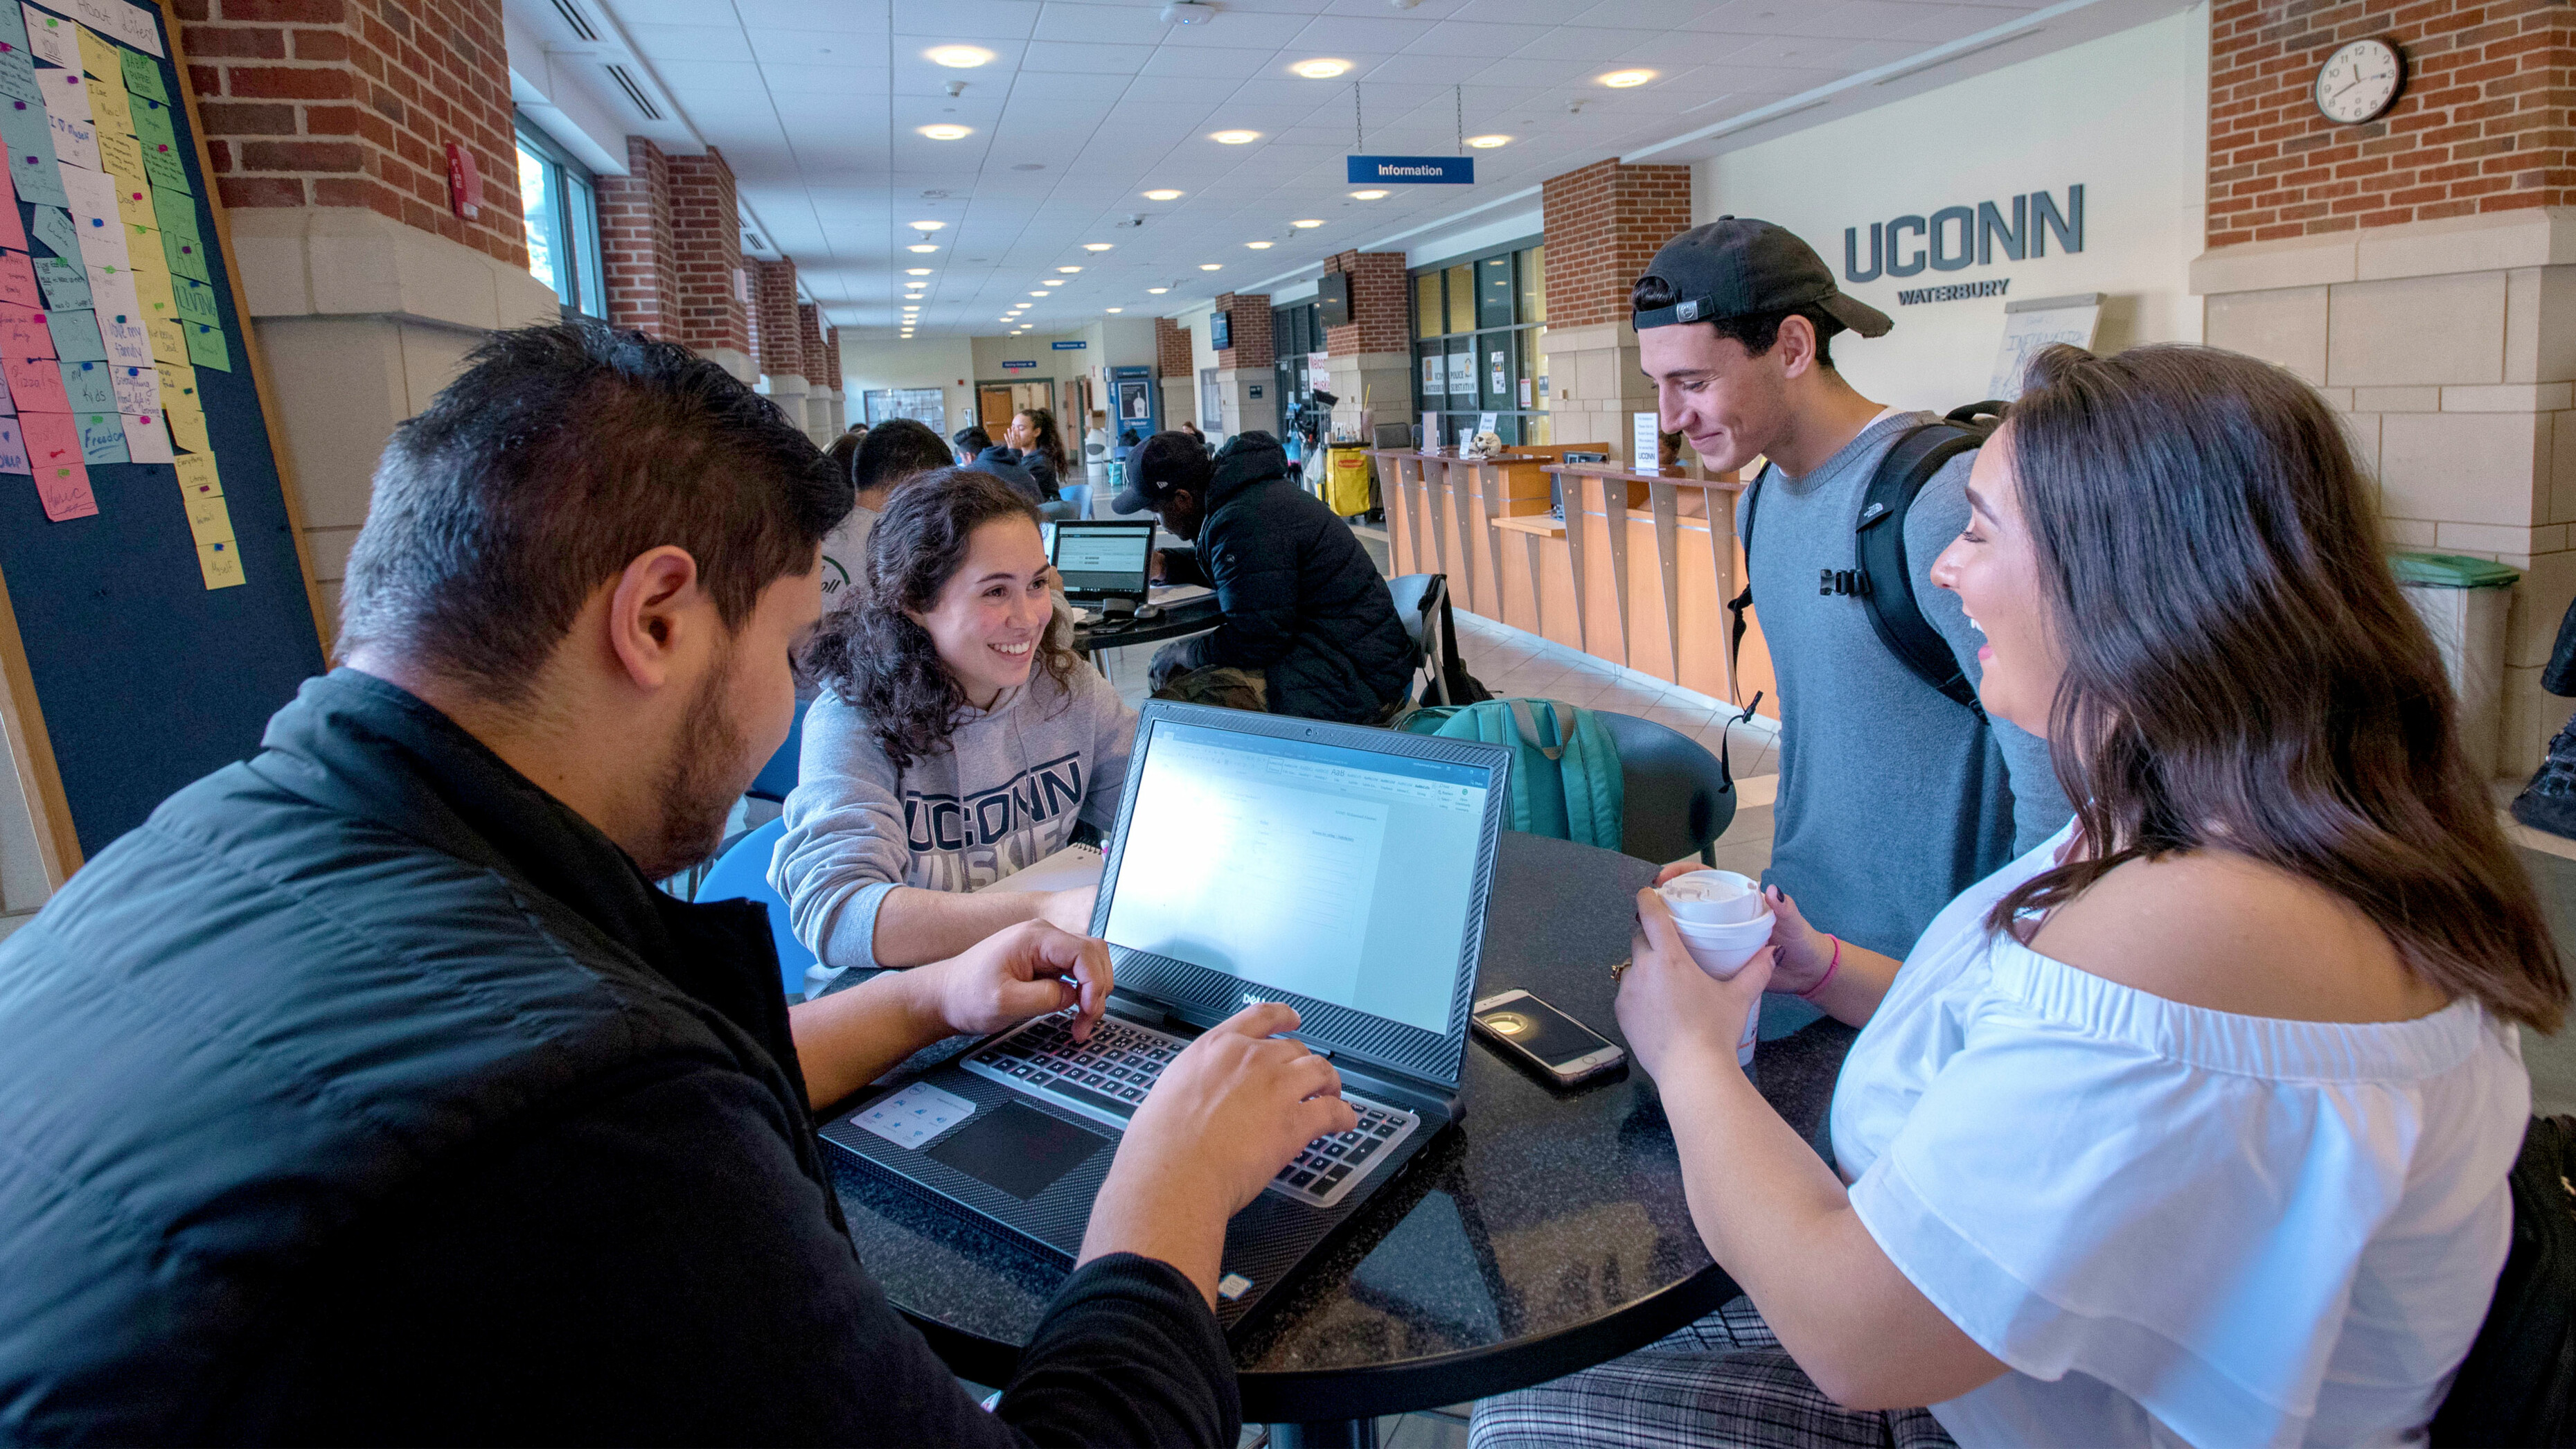 UConn Waterbury student working on laptop at a table with three other students having a conversation